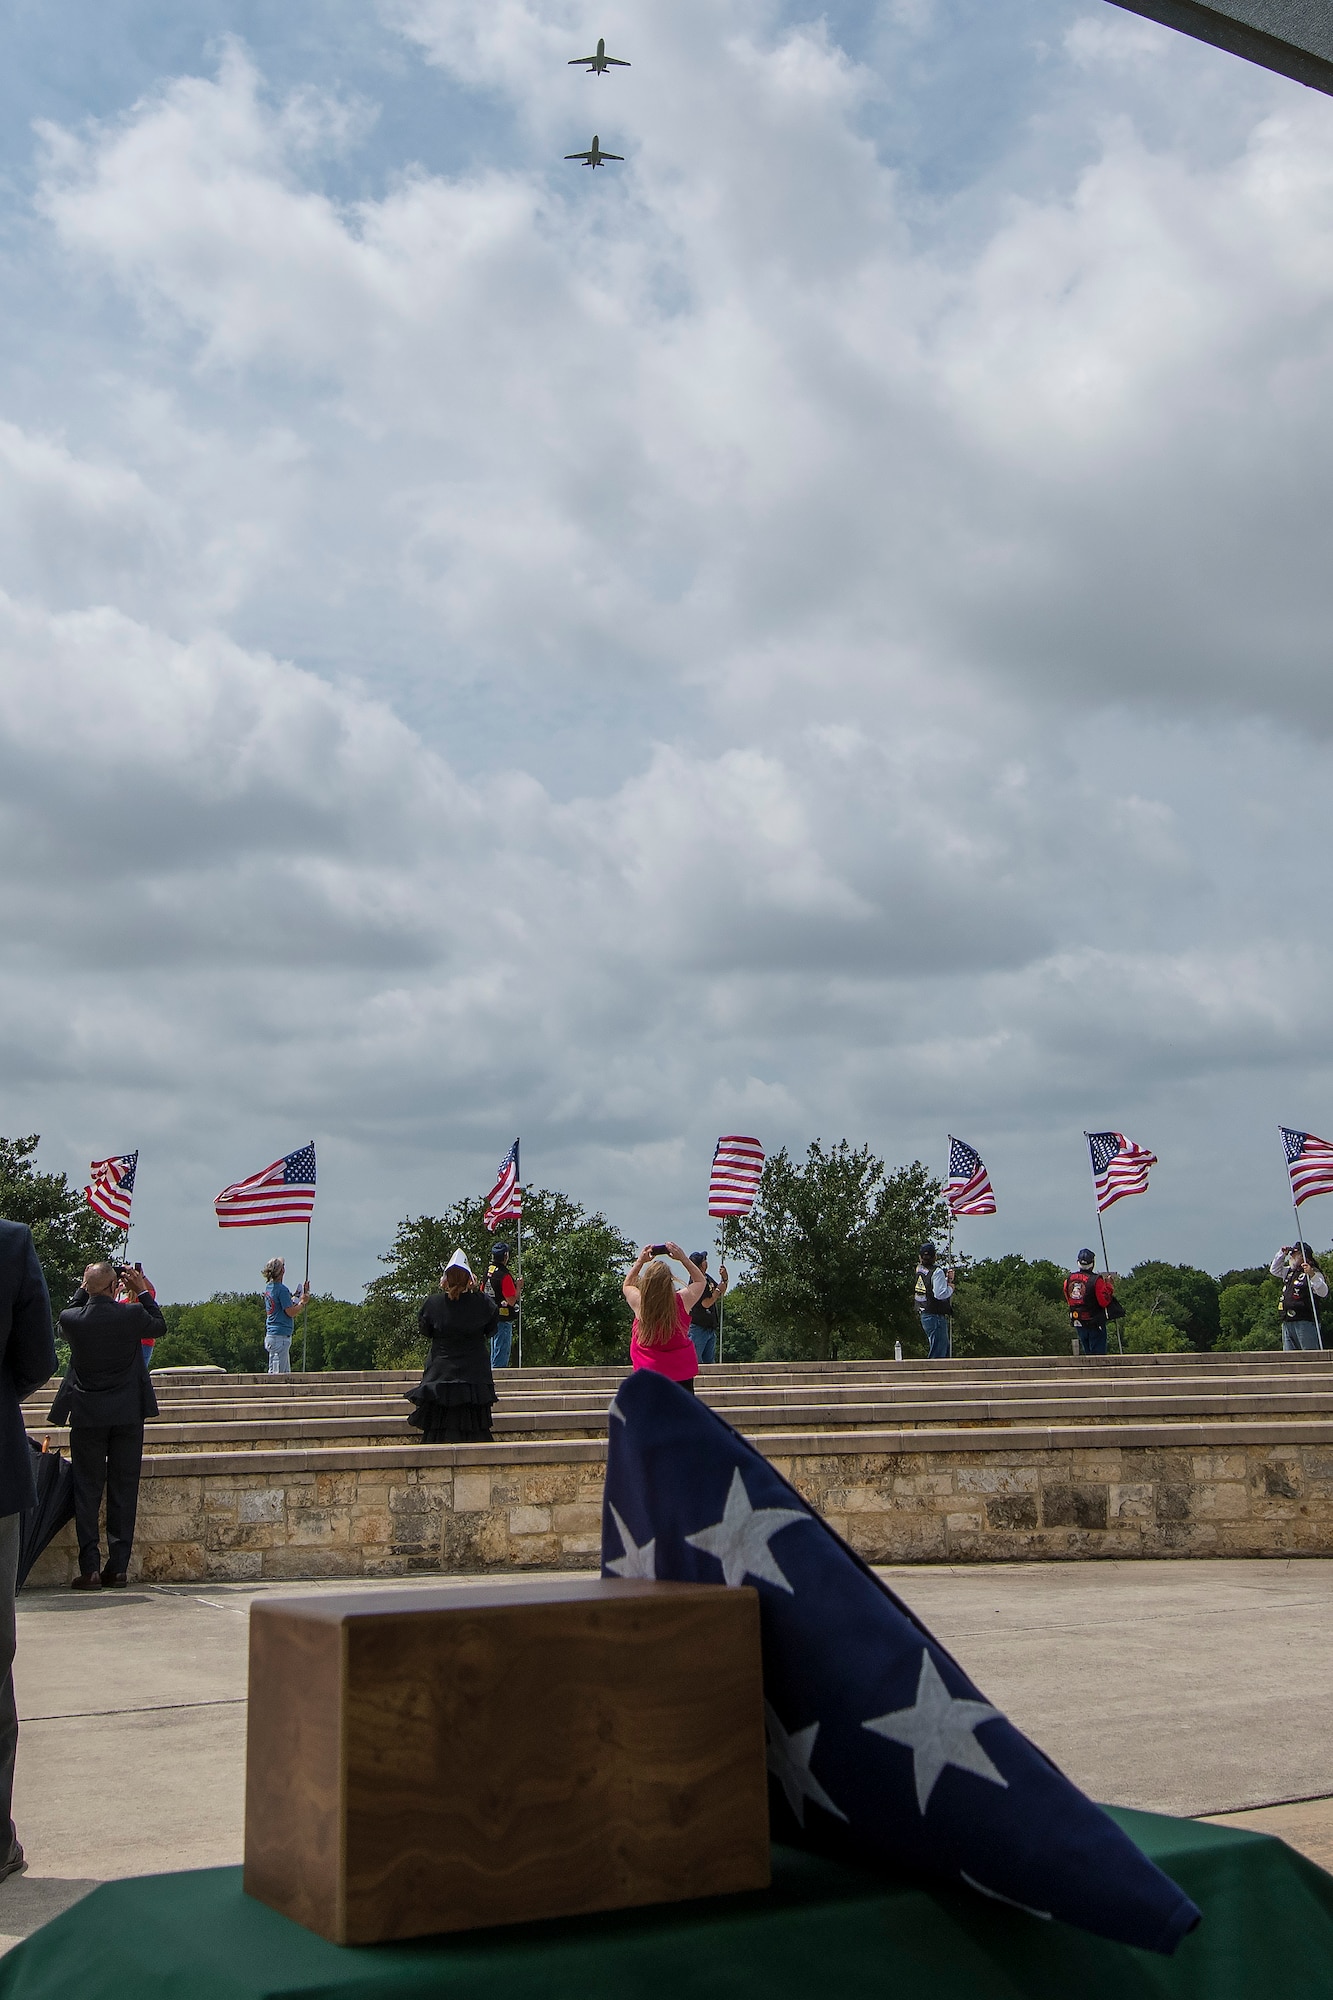 A memorial service for Dr. Granville Coggs, a Documented Original Tuskegee Airman, was held on Friday, June 21, 2019 at Fort Sam Houston National Cemetery. The service culminated in a flyover conducted by two 99th Flying Training Squadron T-1A Jayhawks emblazoned with the “Red Tails” associated with the Tuskegee Airmen. 
(U.S. Air Force photo by: Tristin English)